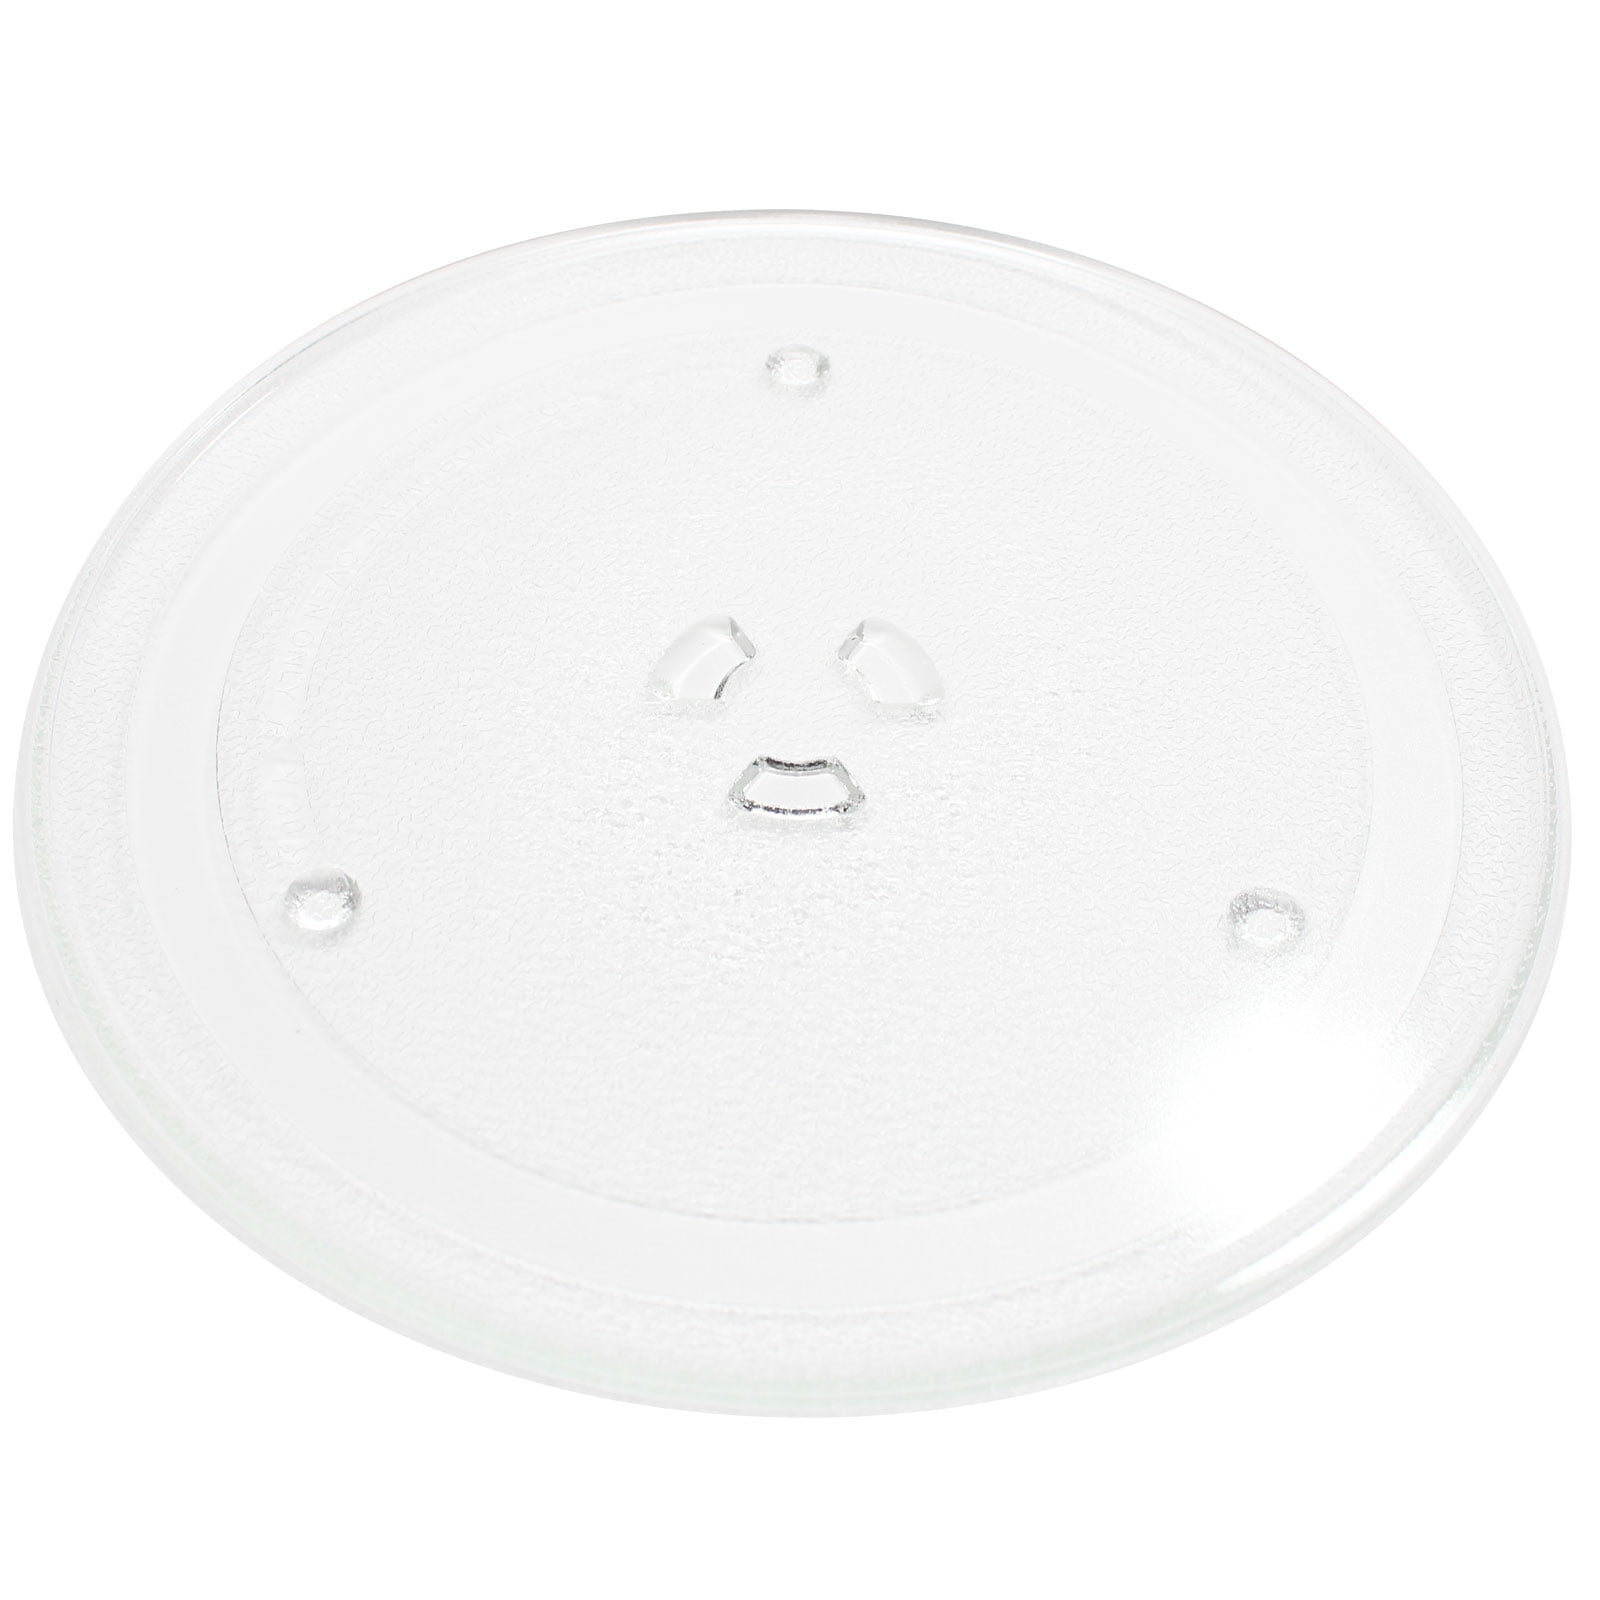 9 5/8" Microwave Glass Turntable Plate Tray for Sunbeam SM0701A7E SBM7700W 